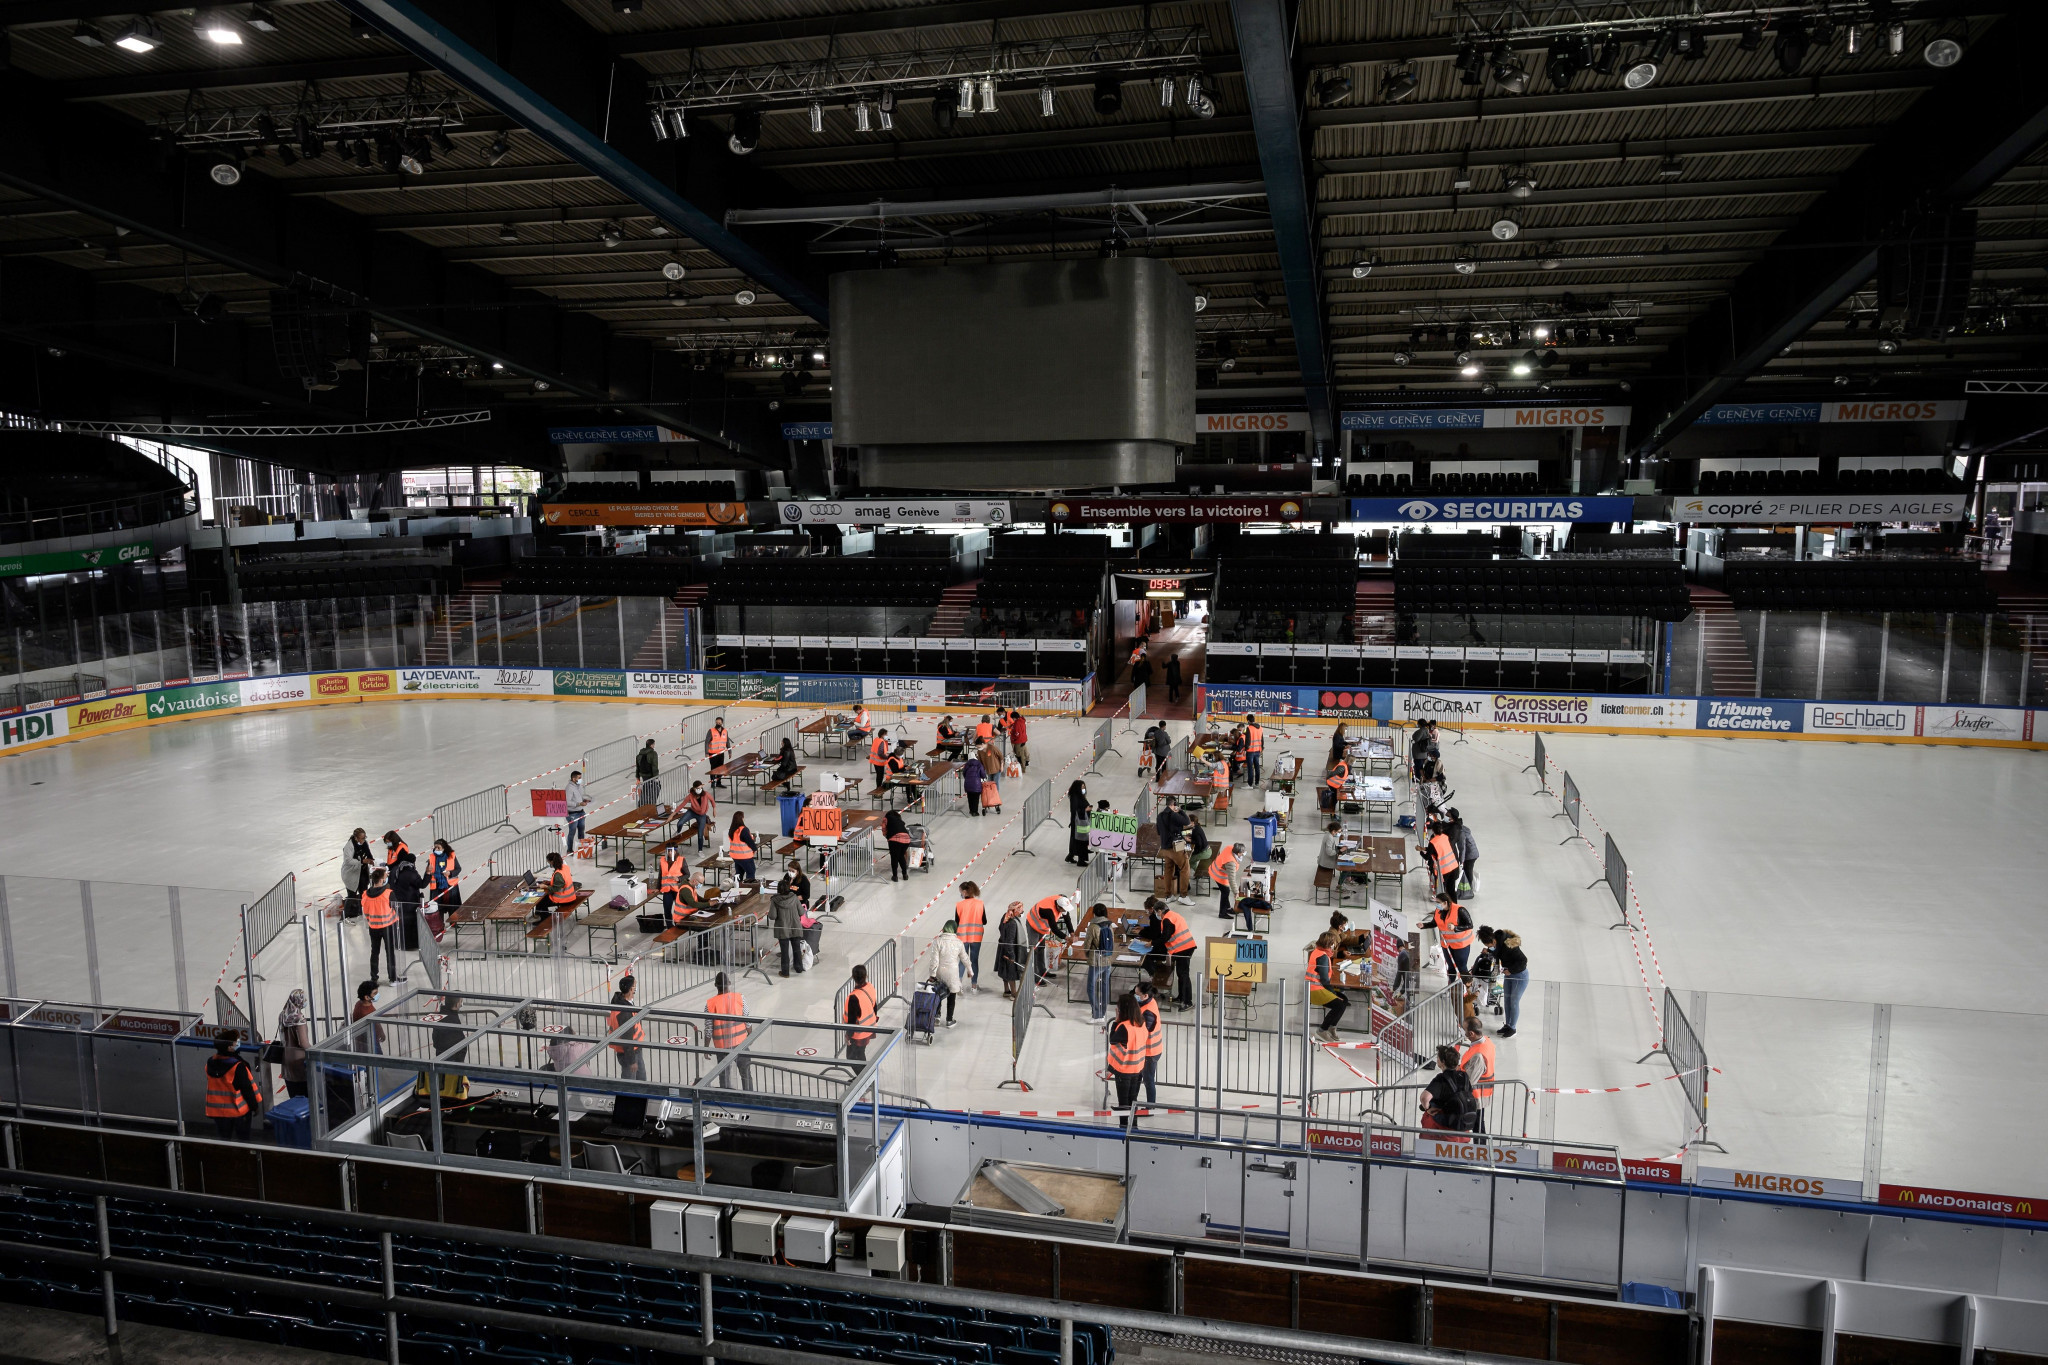 Patinoire des Vernets - primarily an ice hockey stadium - will be the venue in Geneva ©Getty Images